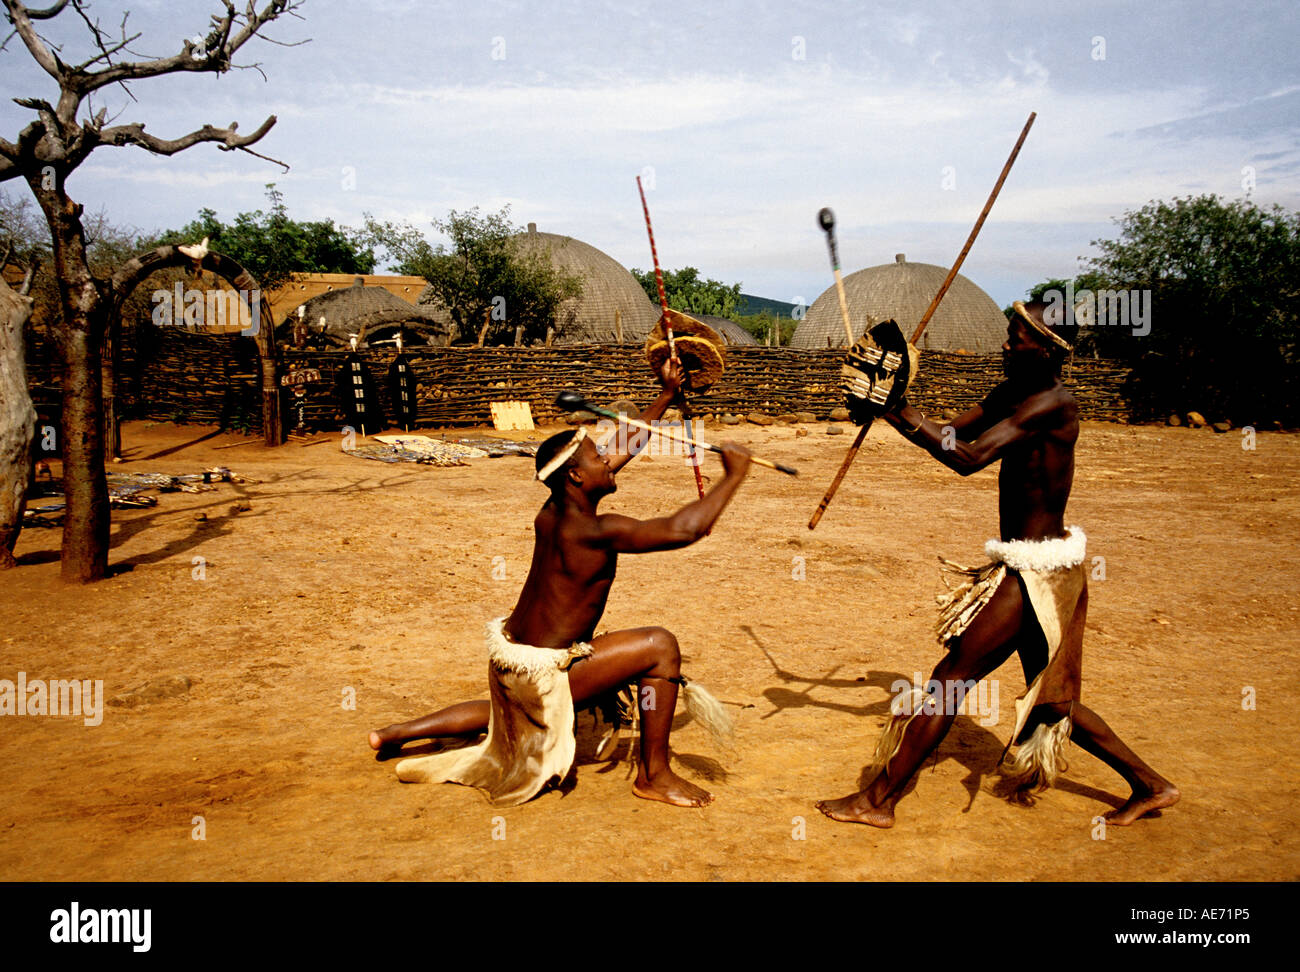 Zulu men demonstrating traditional fighting with sticks, Stock